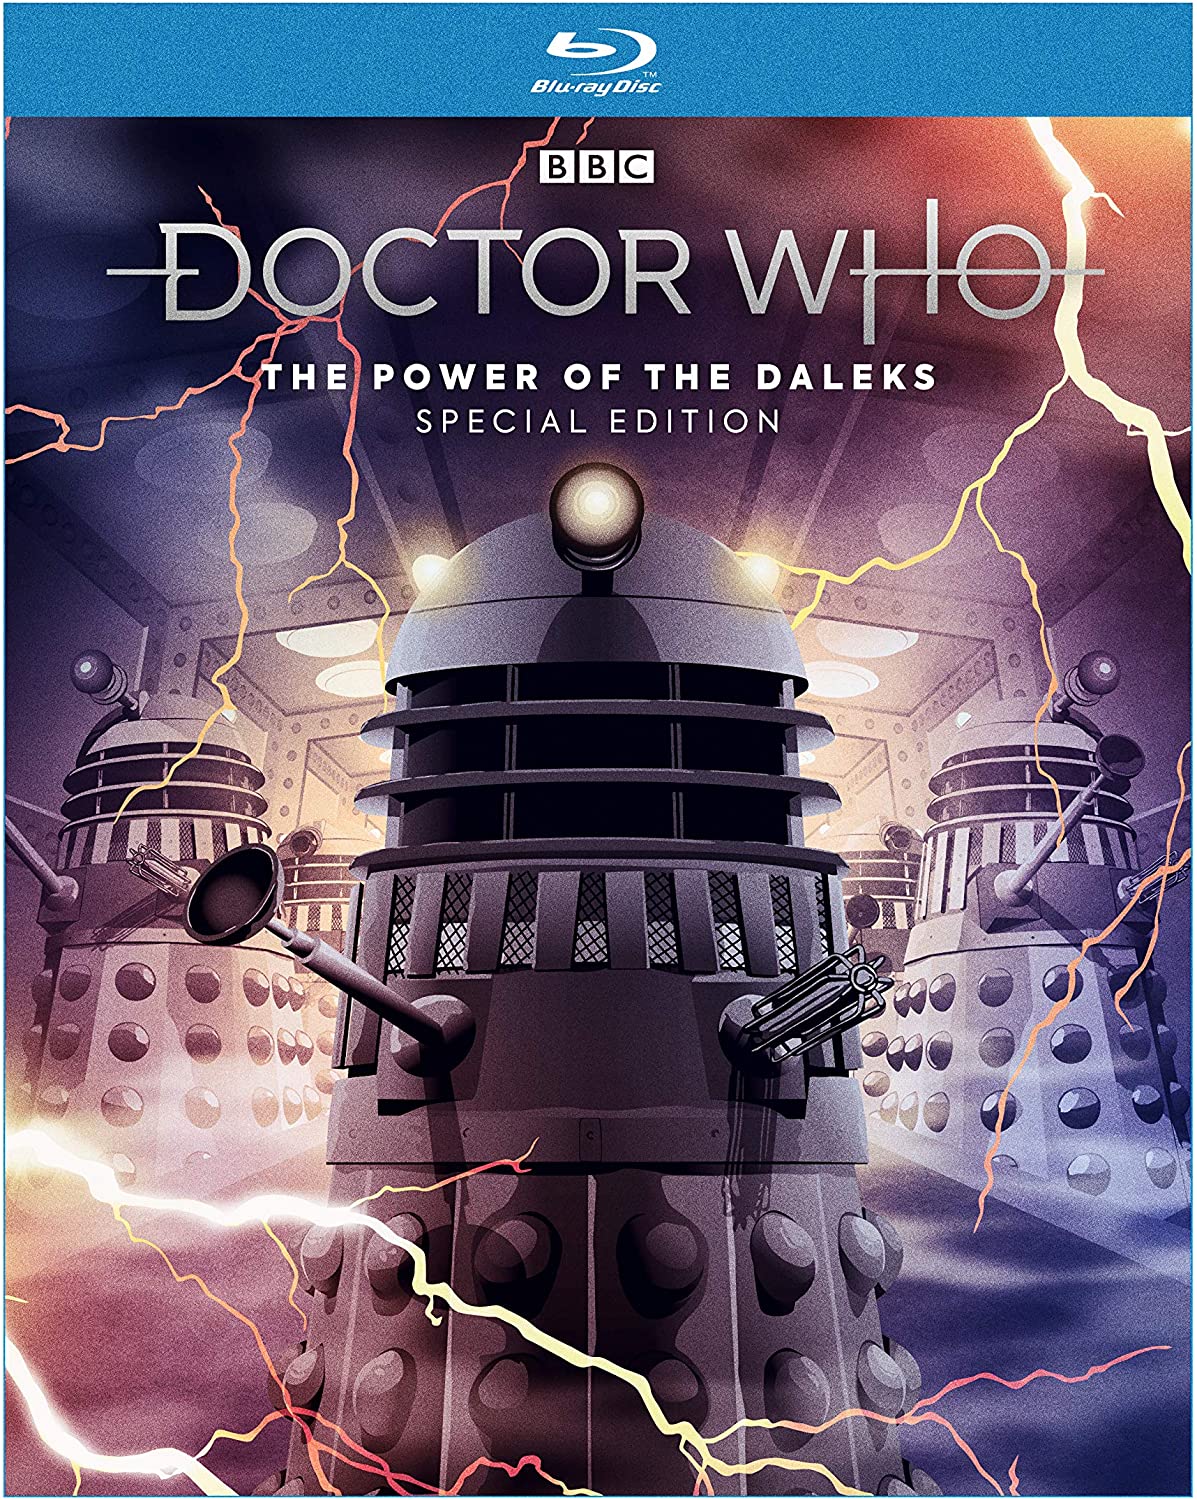 Dr Who 1960s Film and the Daleks Repro Film POSTER 